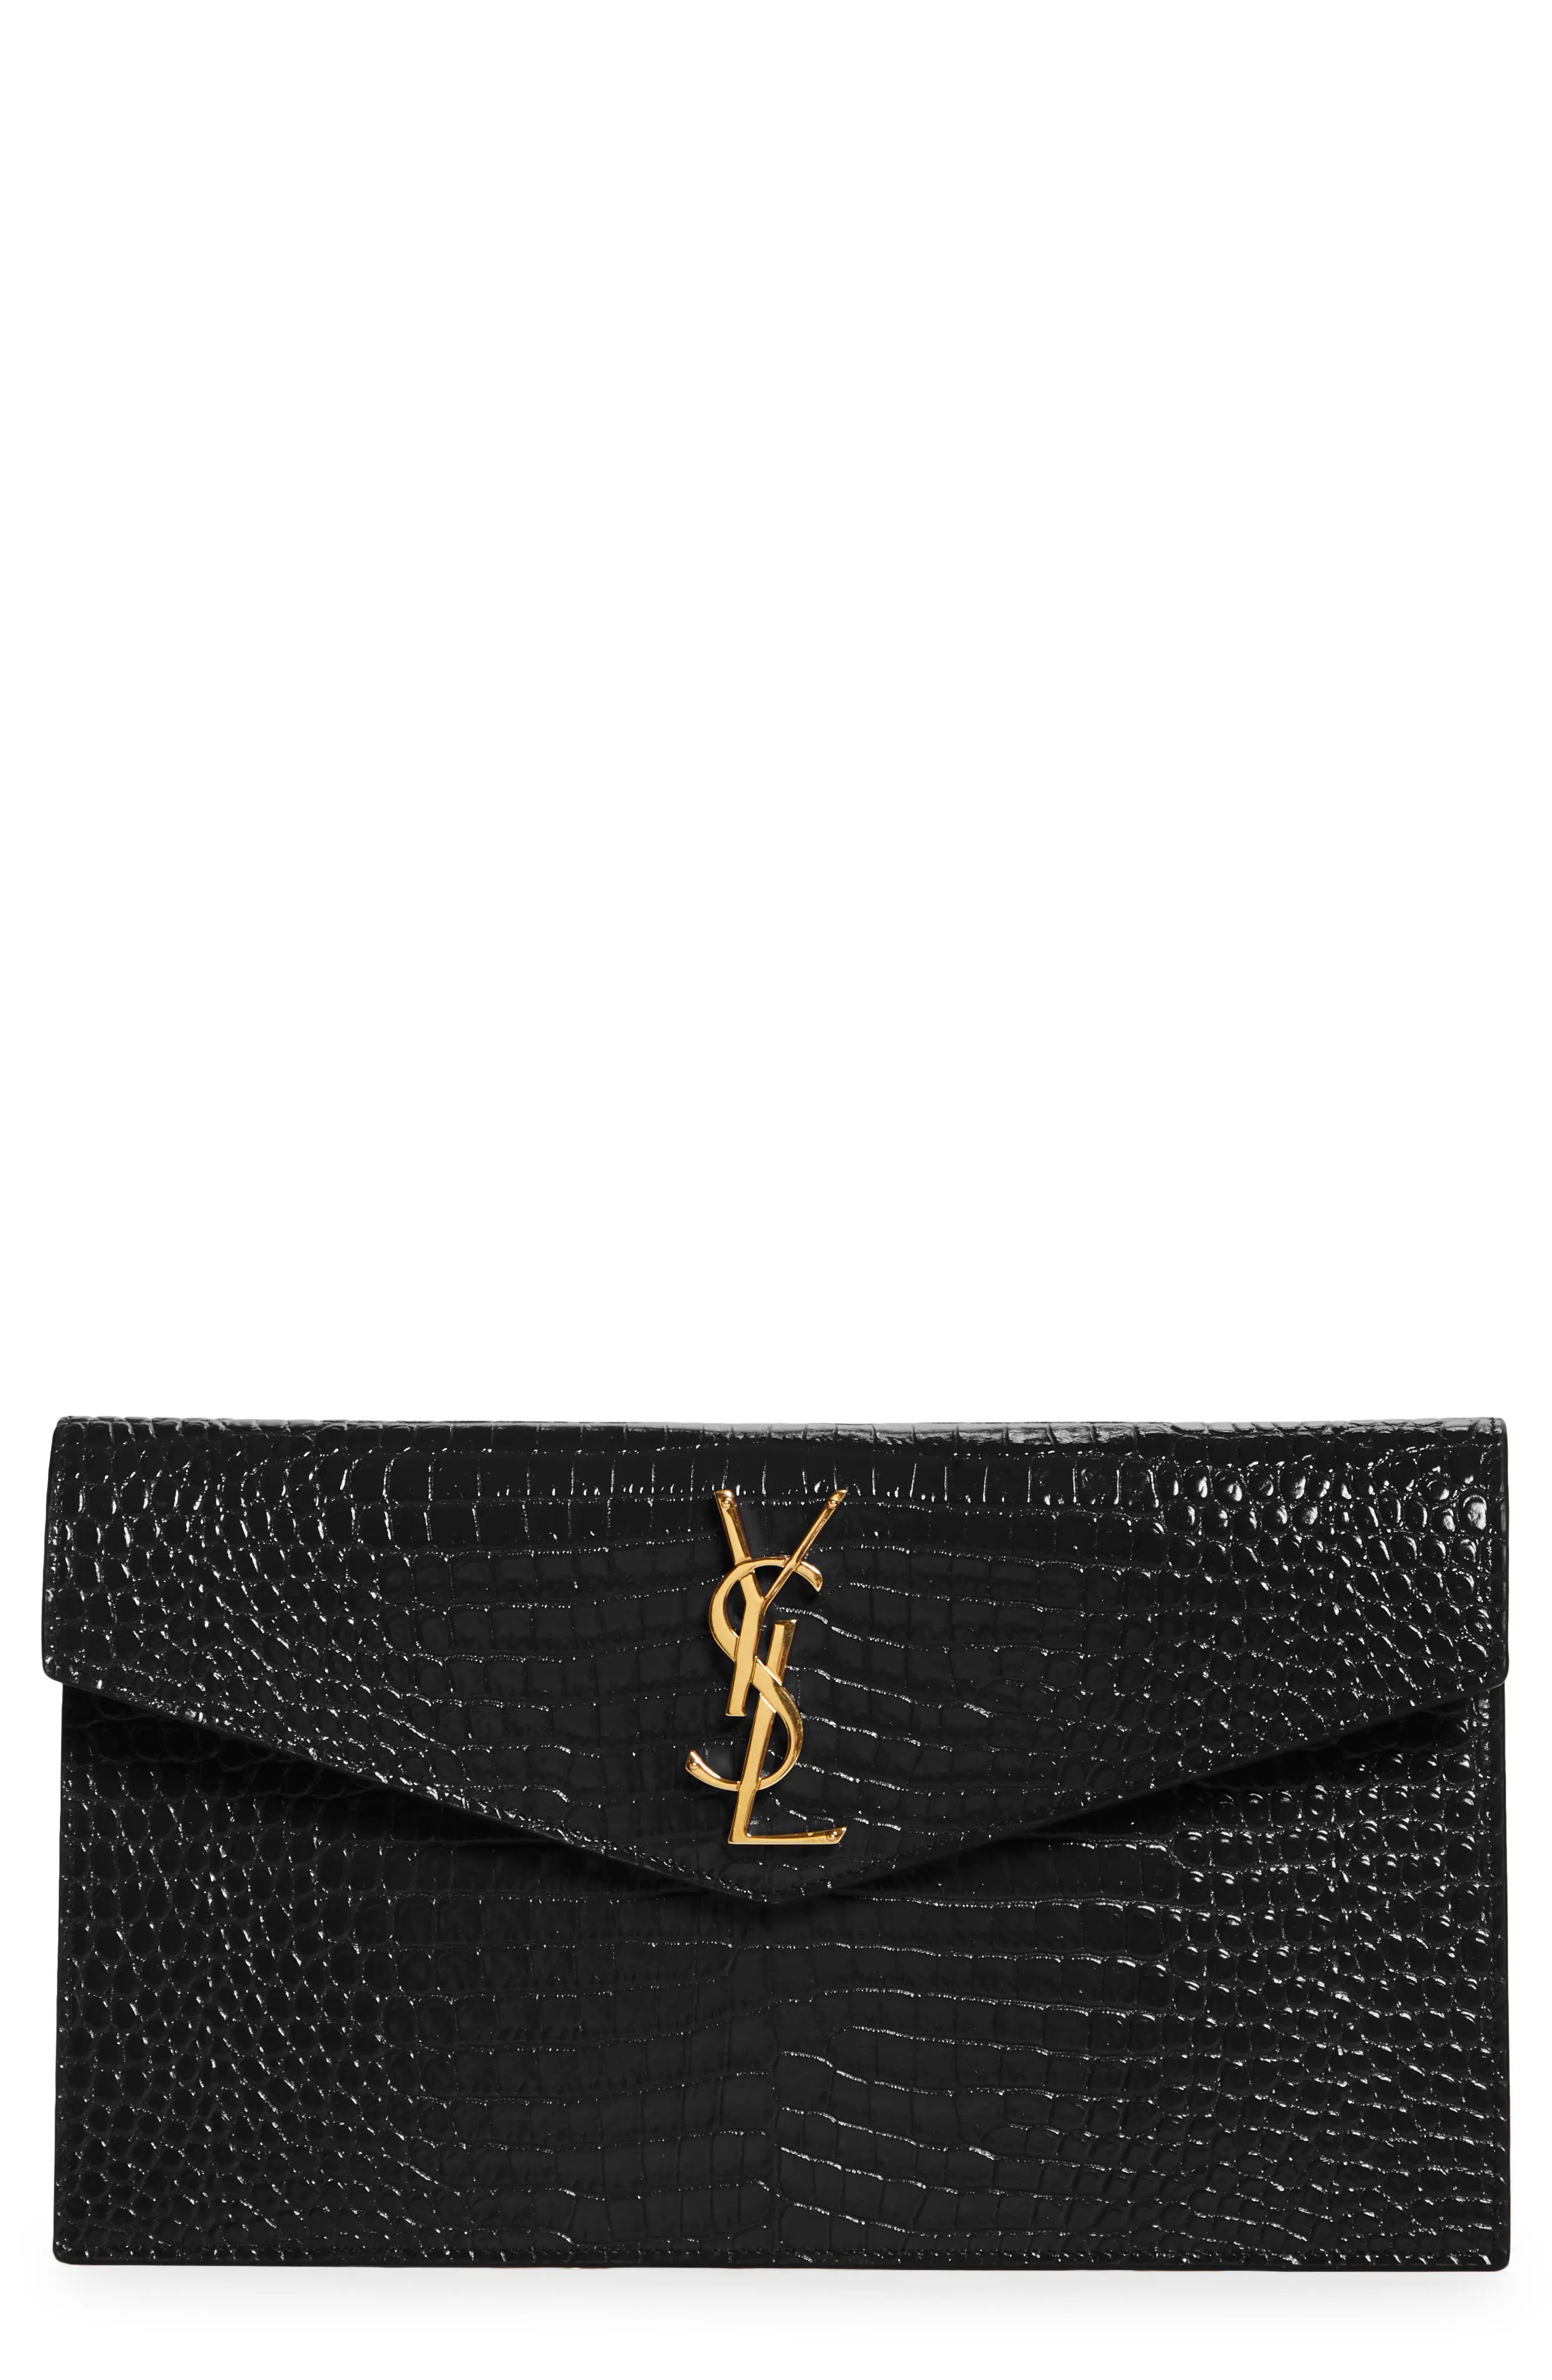 Saint Laurent Uptown Croc Embossed Leather Pouch in Nero at Nordstrom | Nordstrom